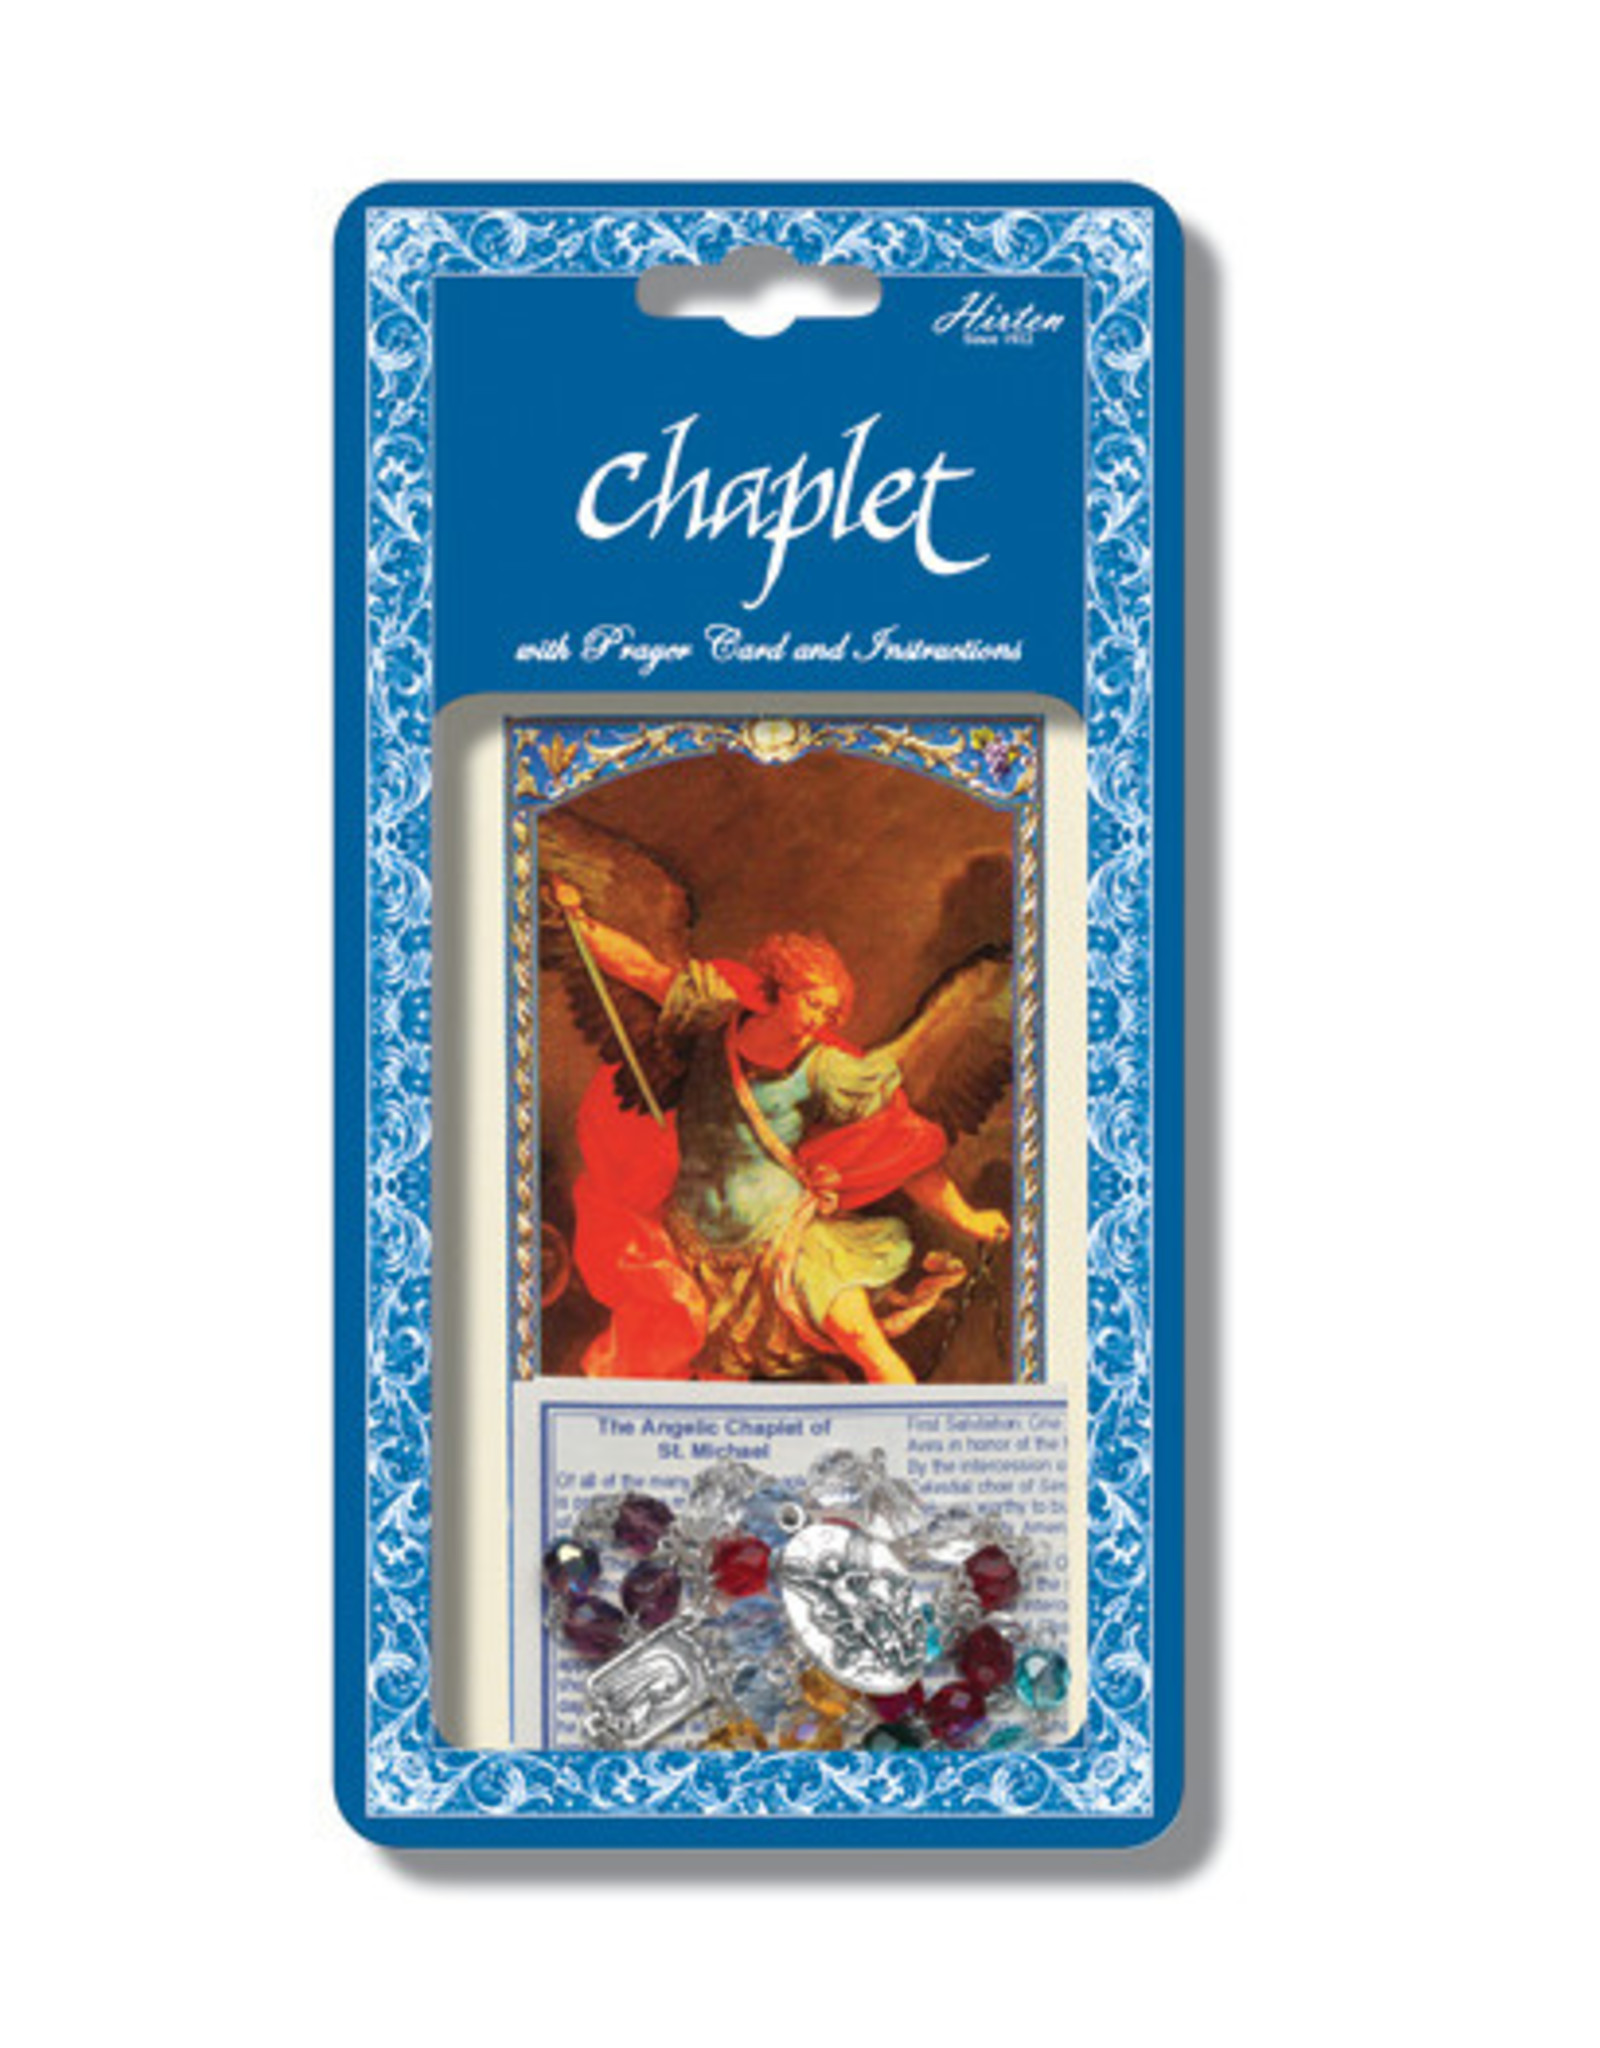 Hirten St. Michael Chaplet with Prayer Card and Instructions